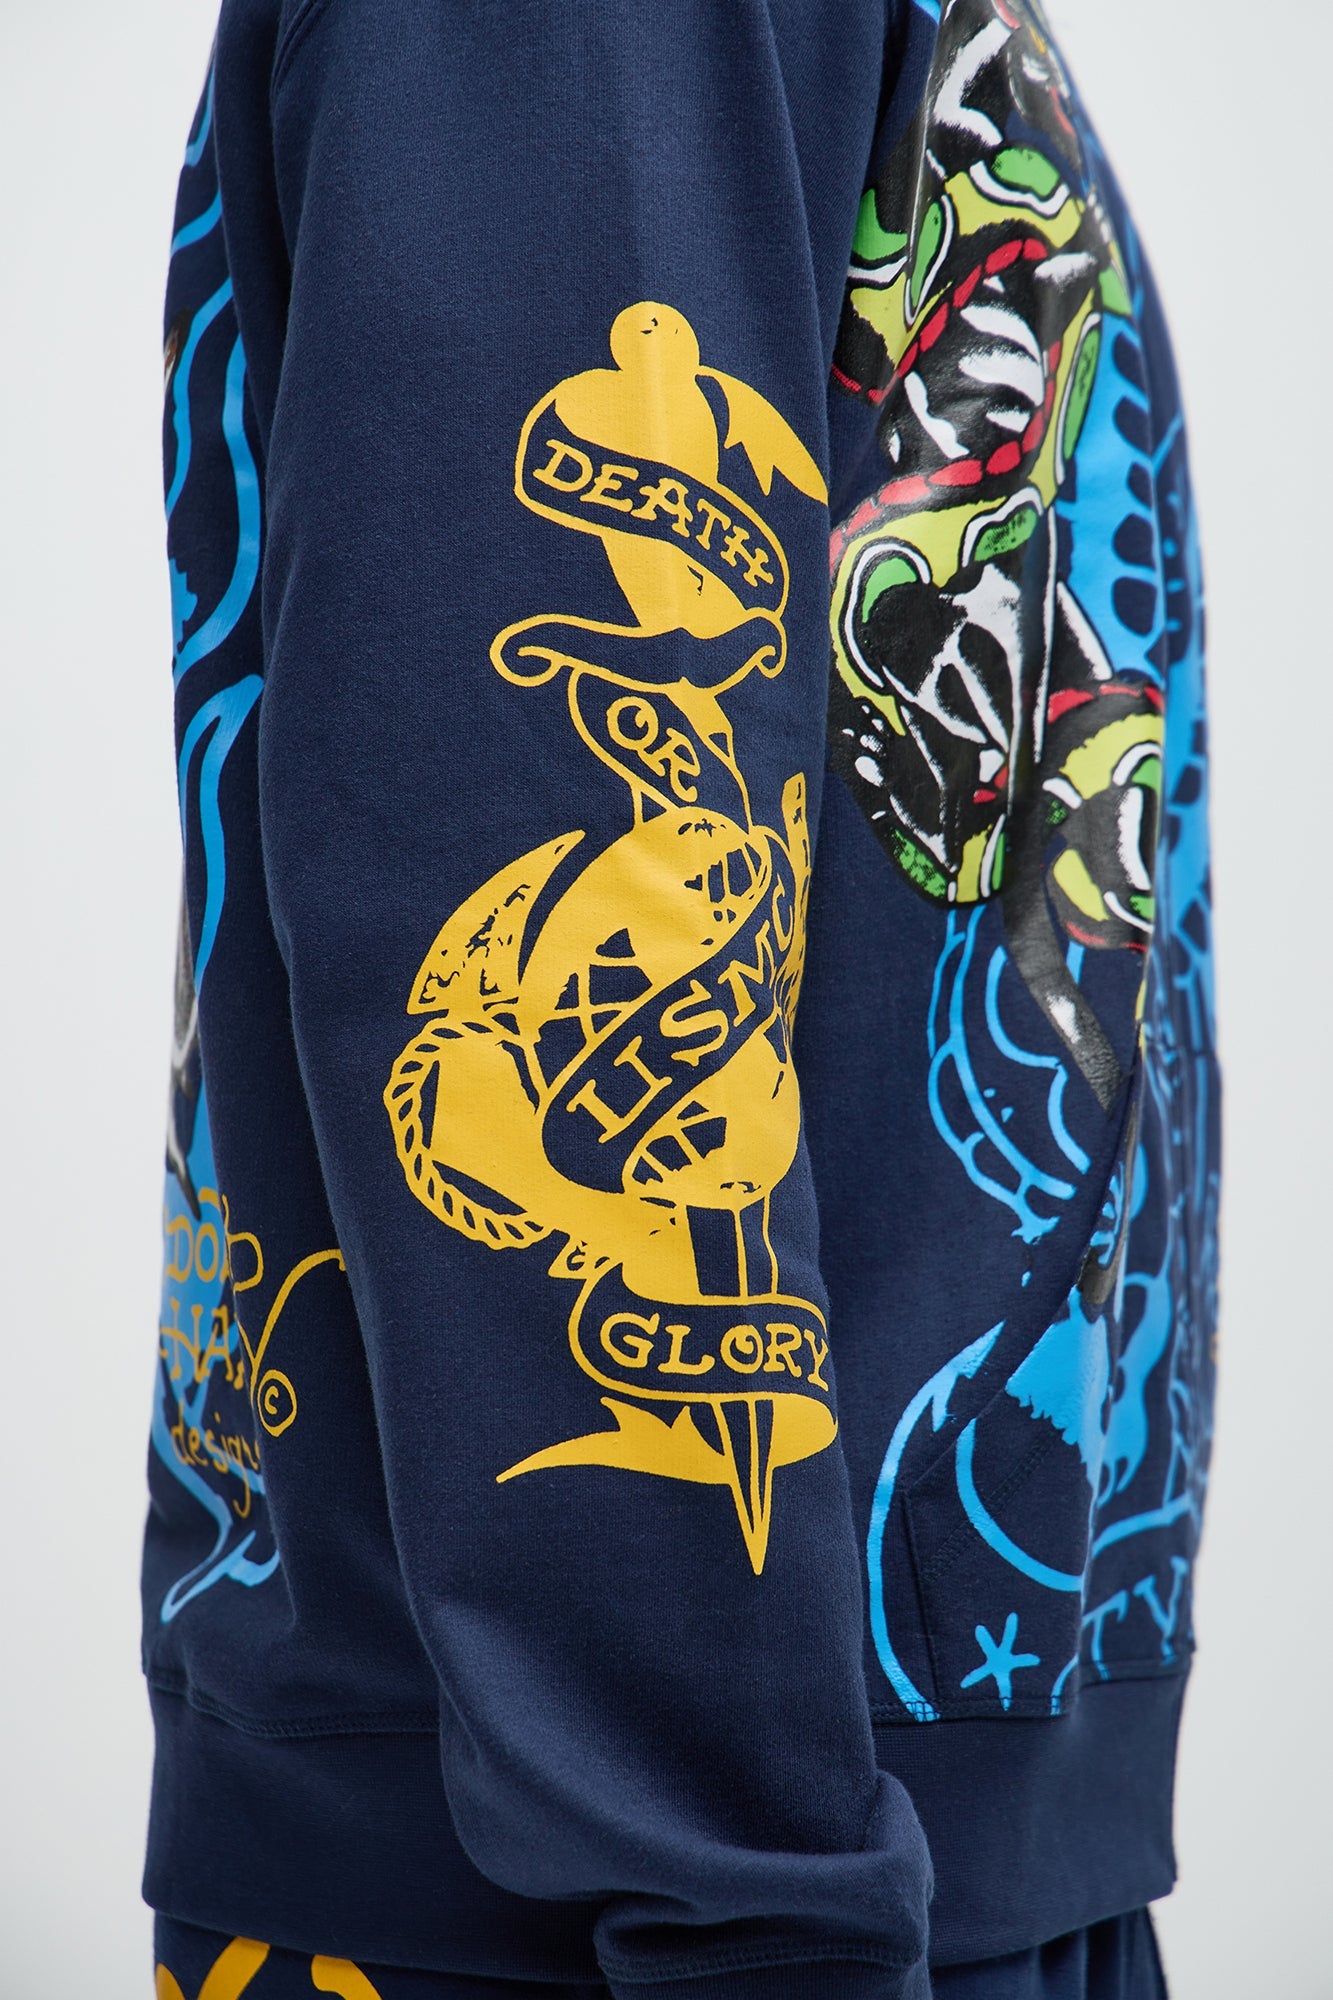 Ed Hardy Panther Bulldog Zip-Up Hoodie in Navy: A Cool, Edgy Addition to Your Wardrobe